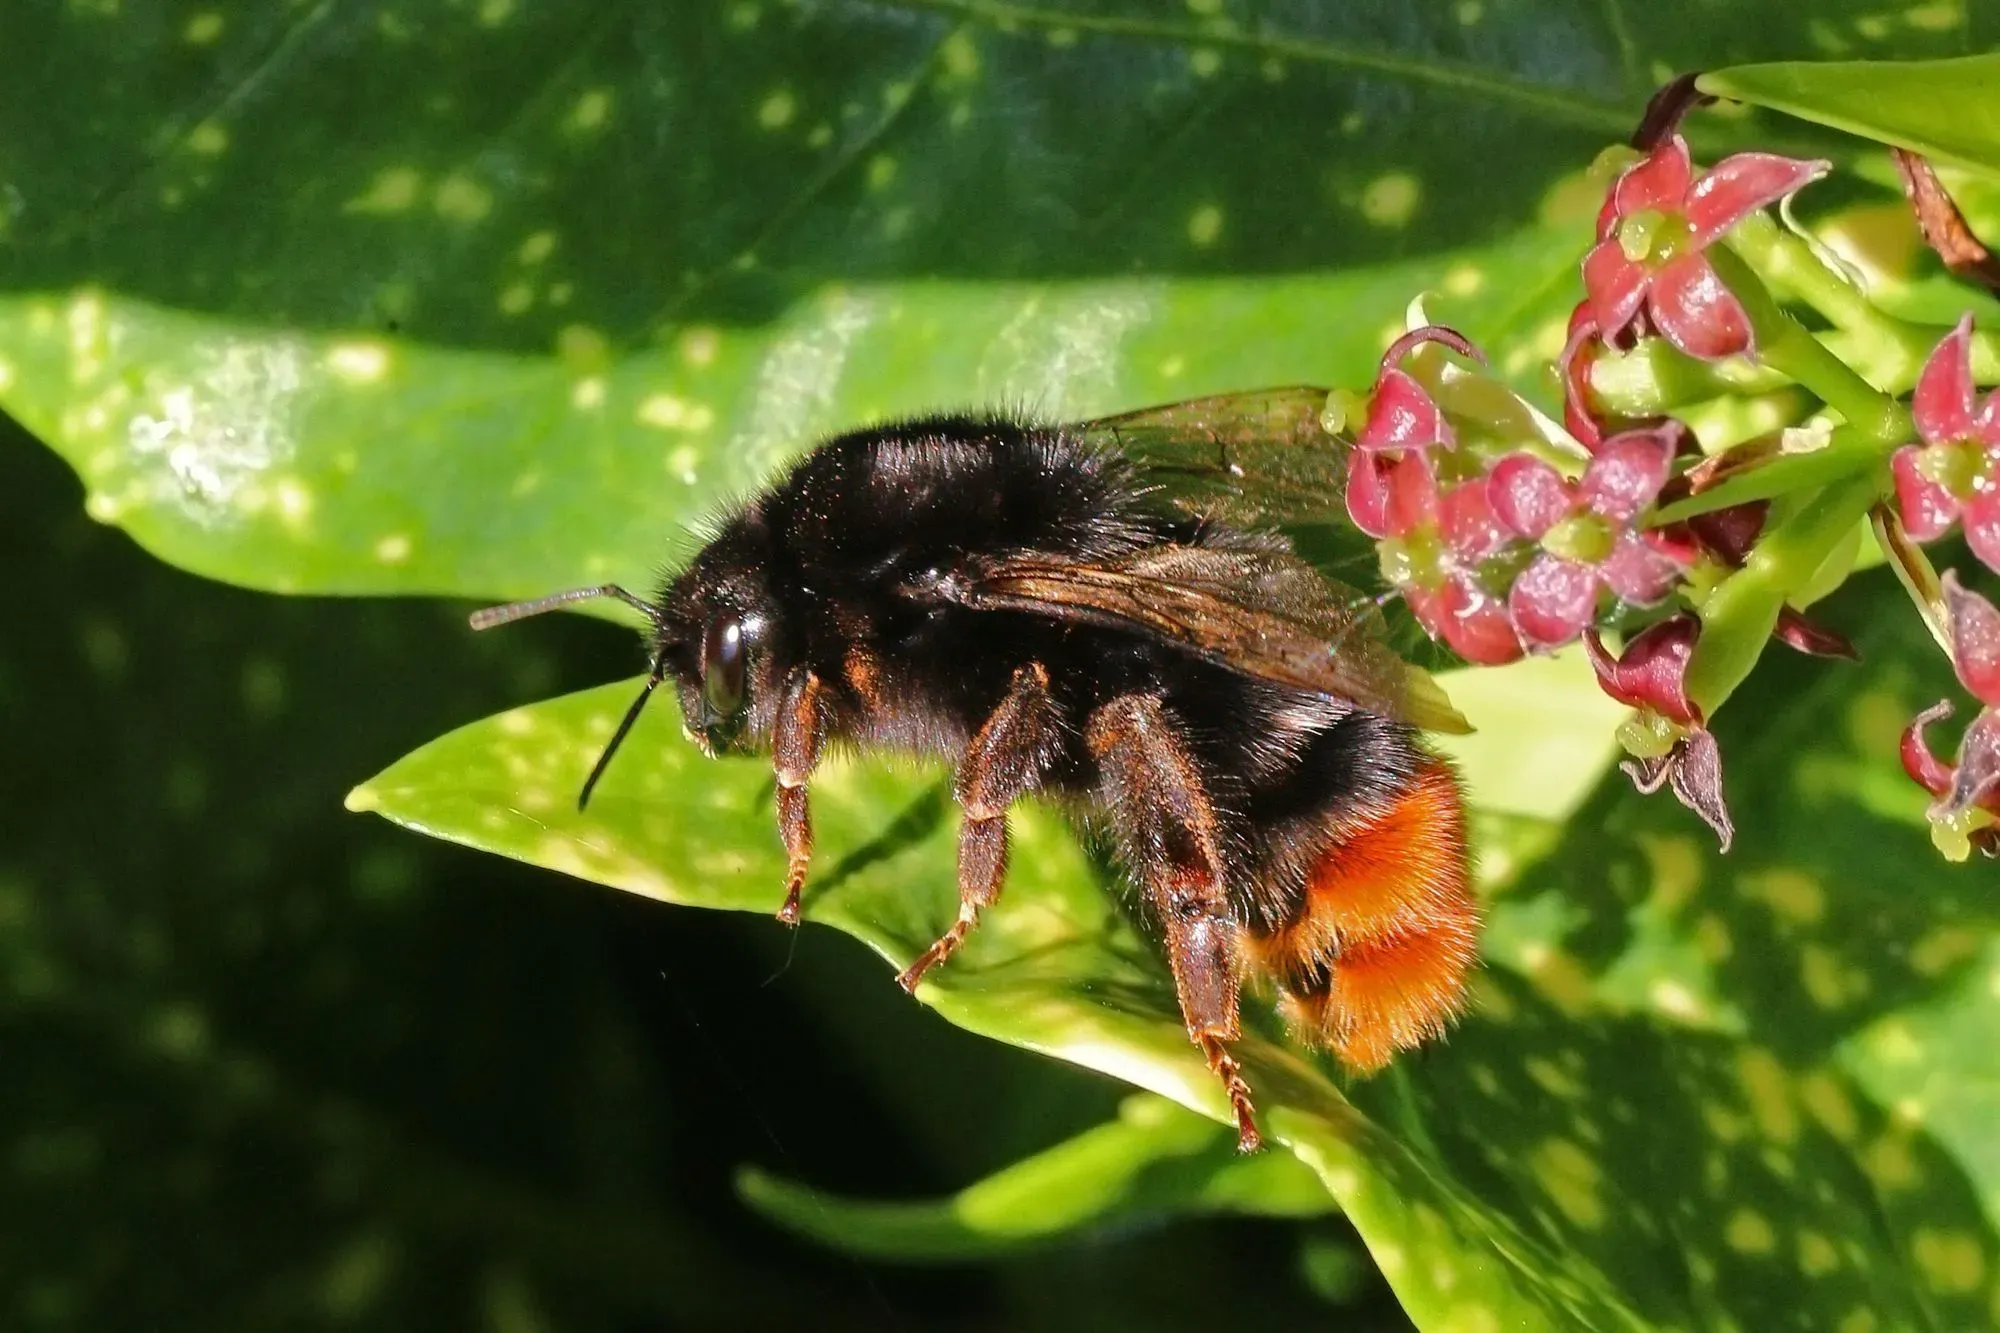 Red-tailed bumblebees have an orange-red tail.